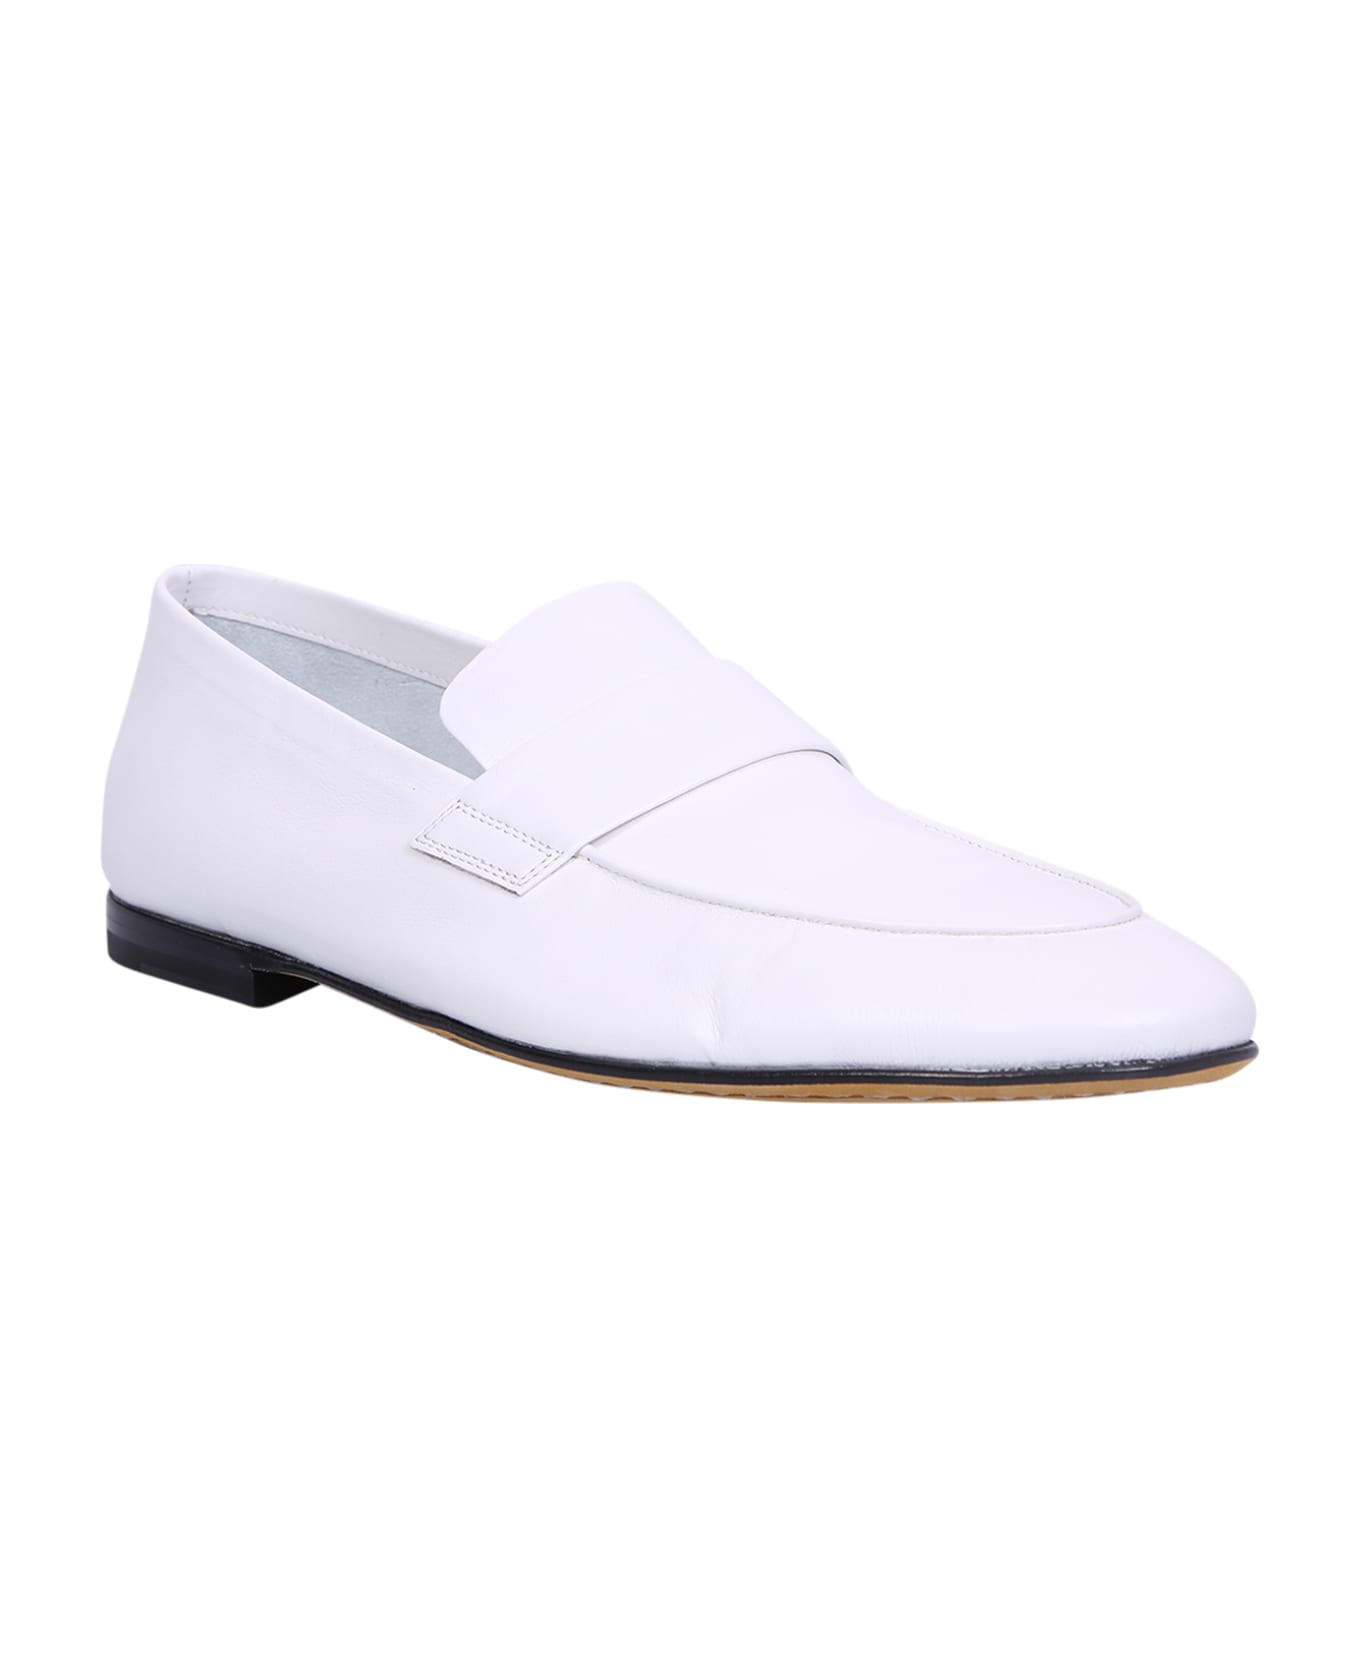 Officine Creative Airto 1 Leather White Loafers - White